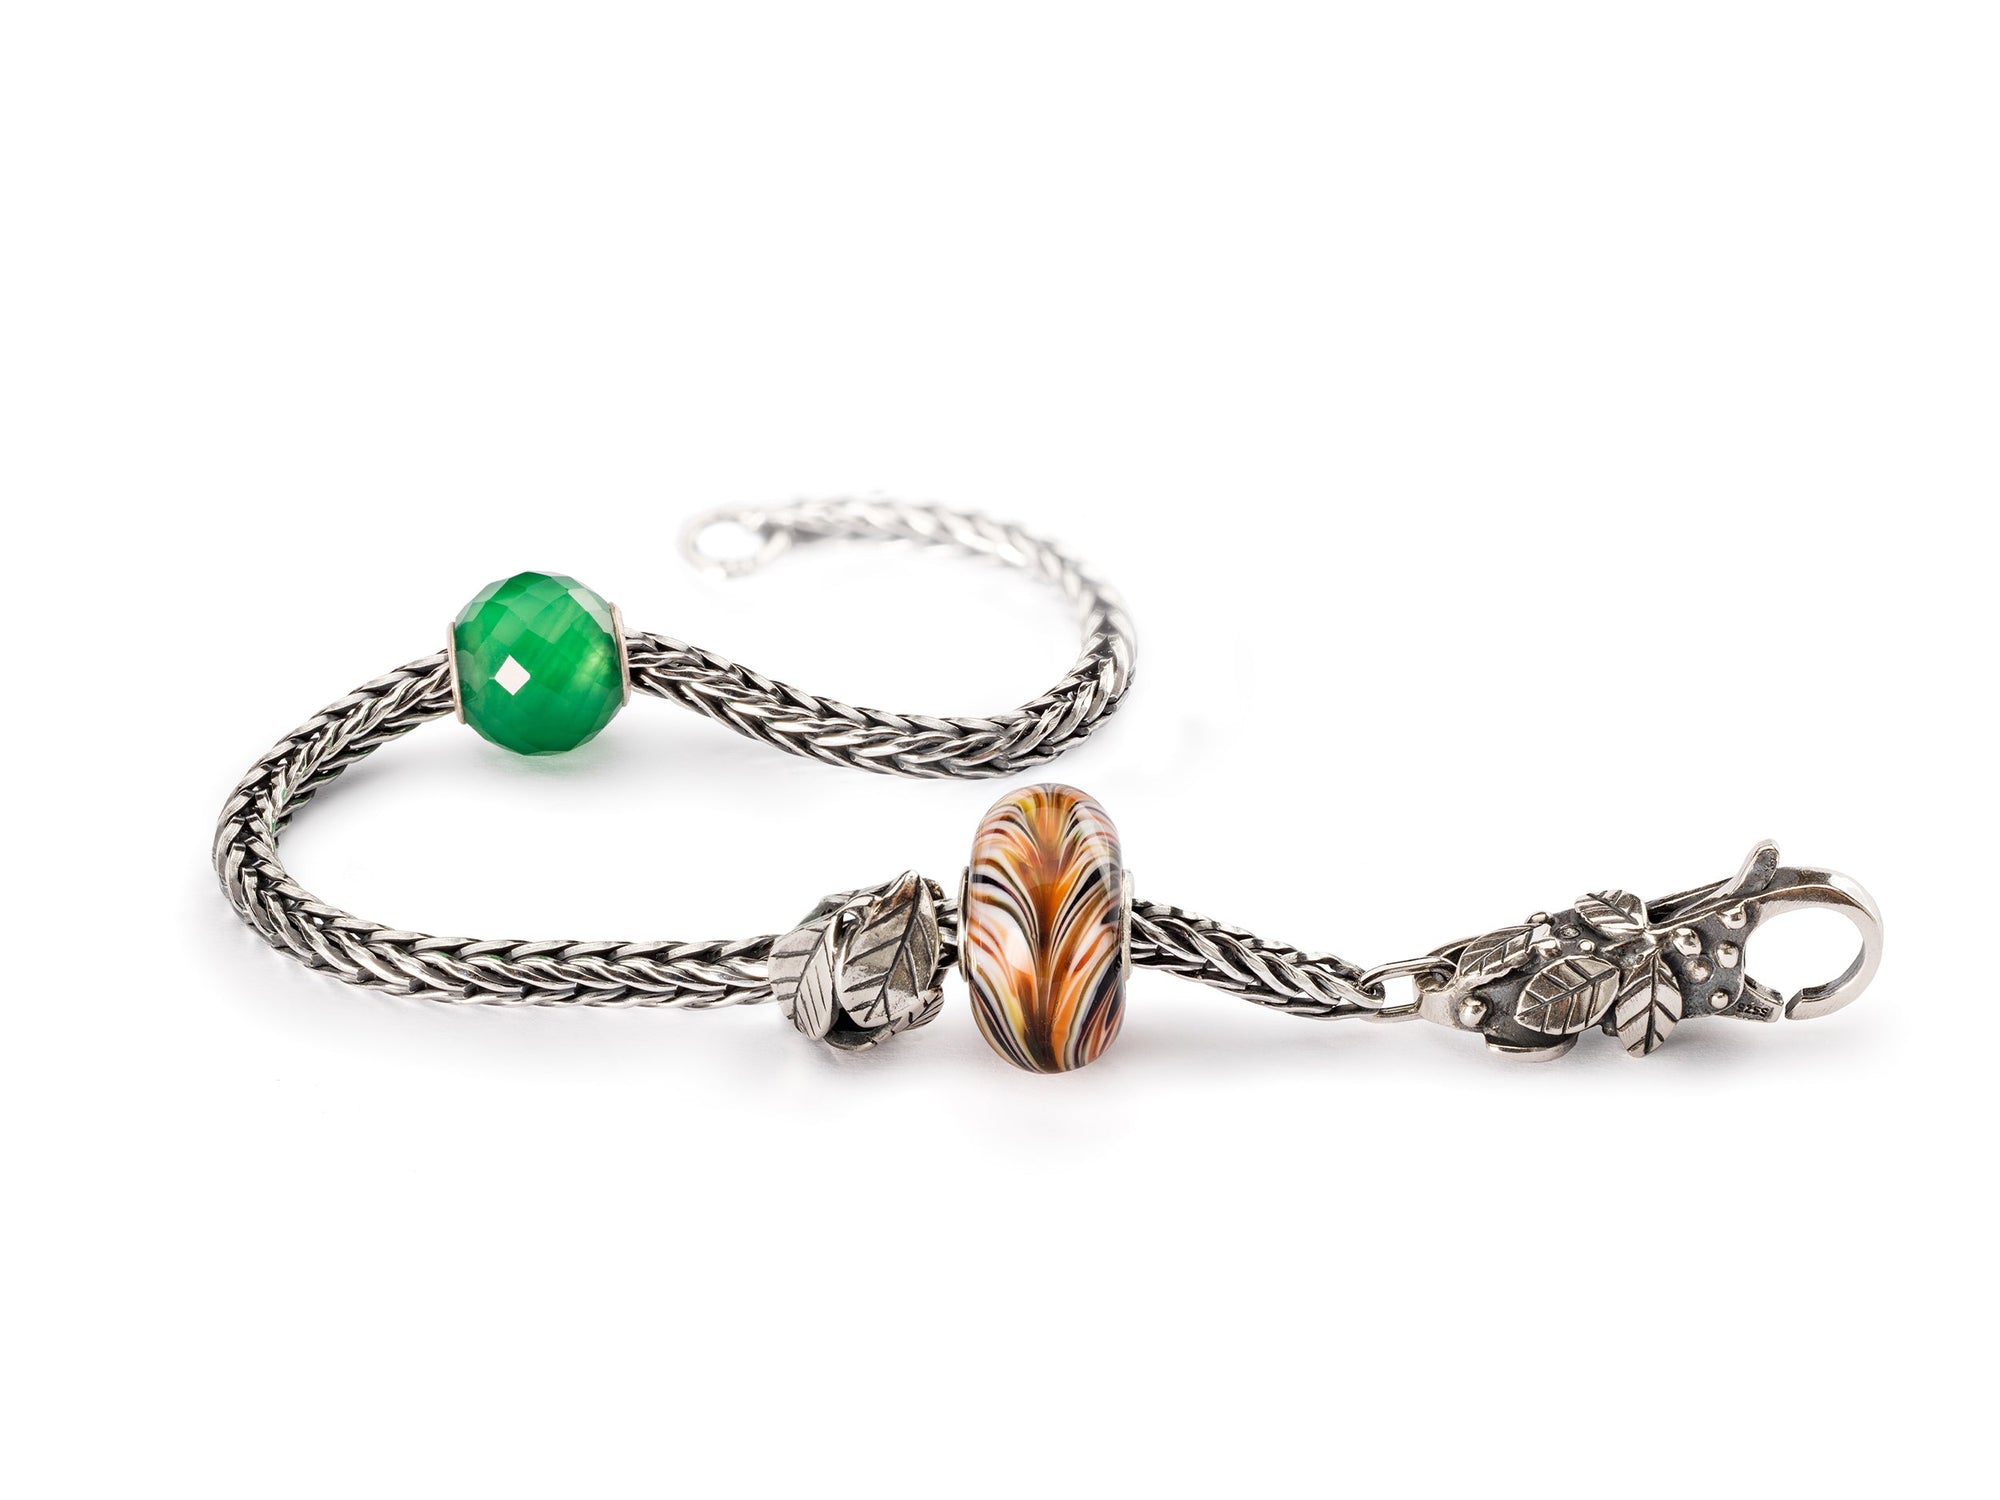 Trollbeads Bracelet Inspiration 1 – Blooming Boutique Beads